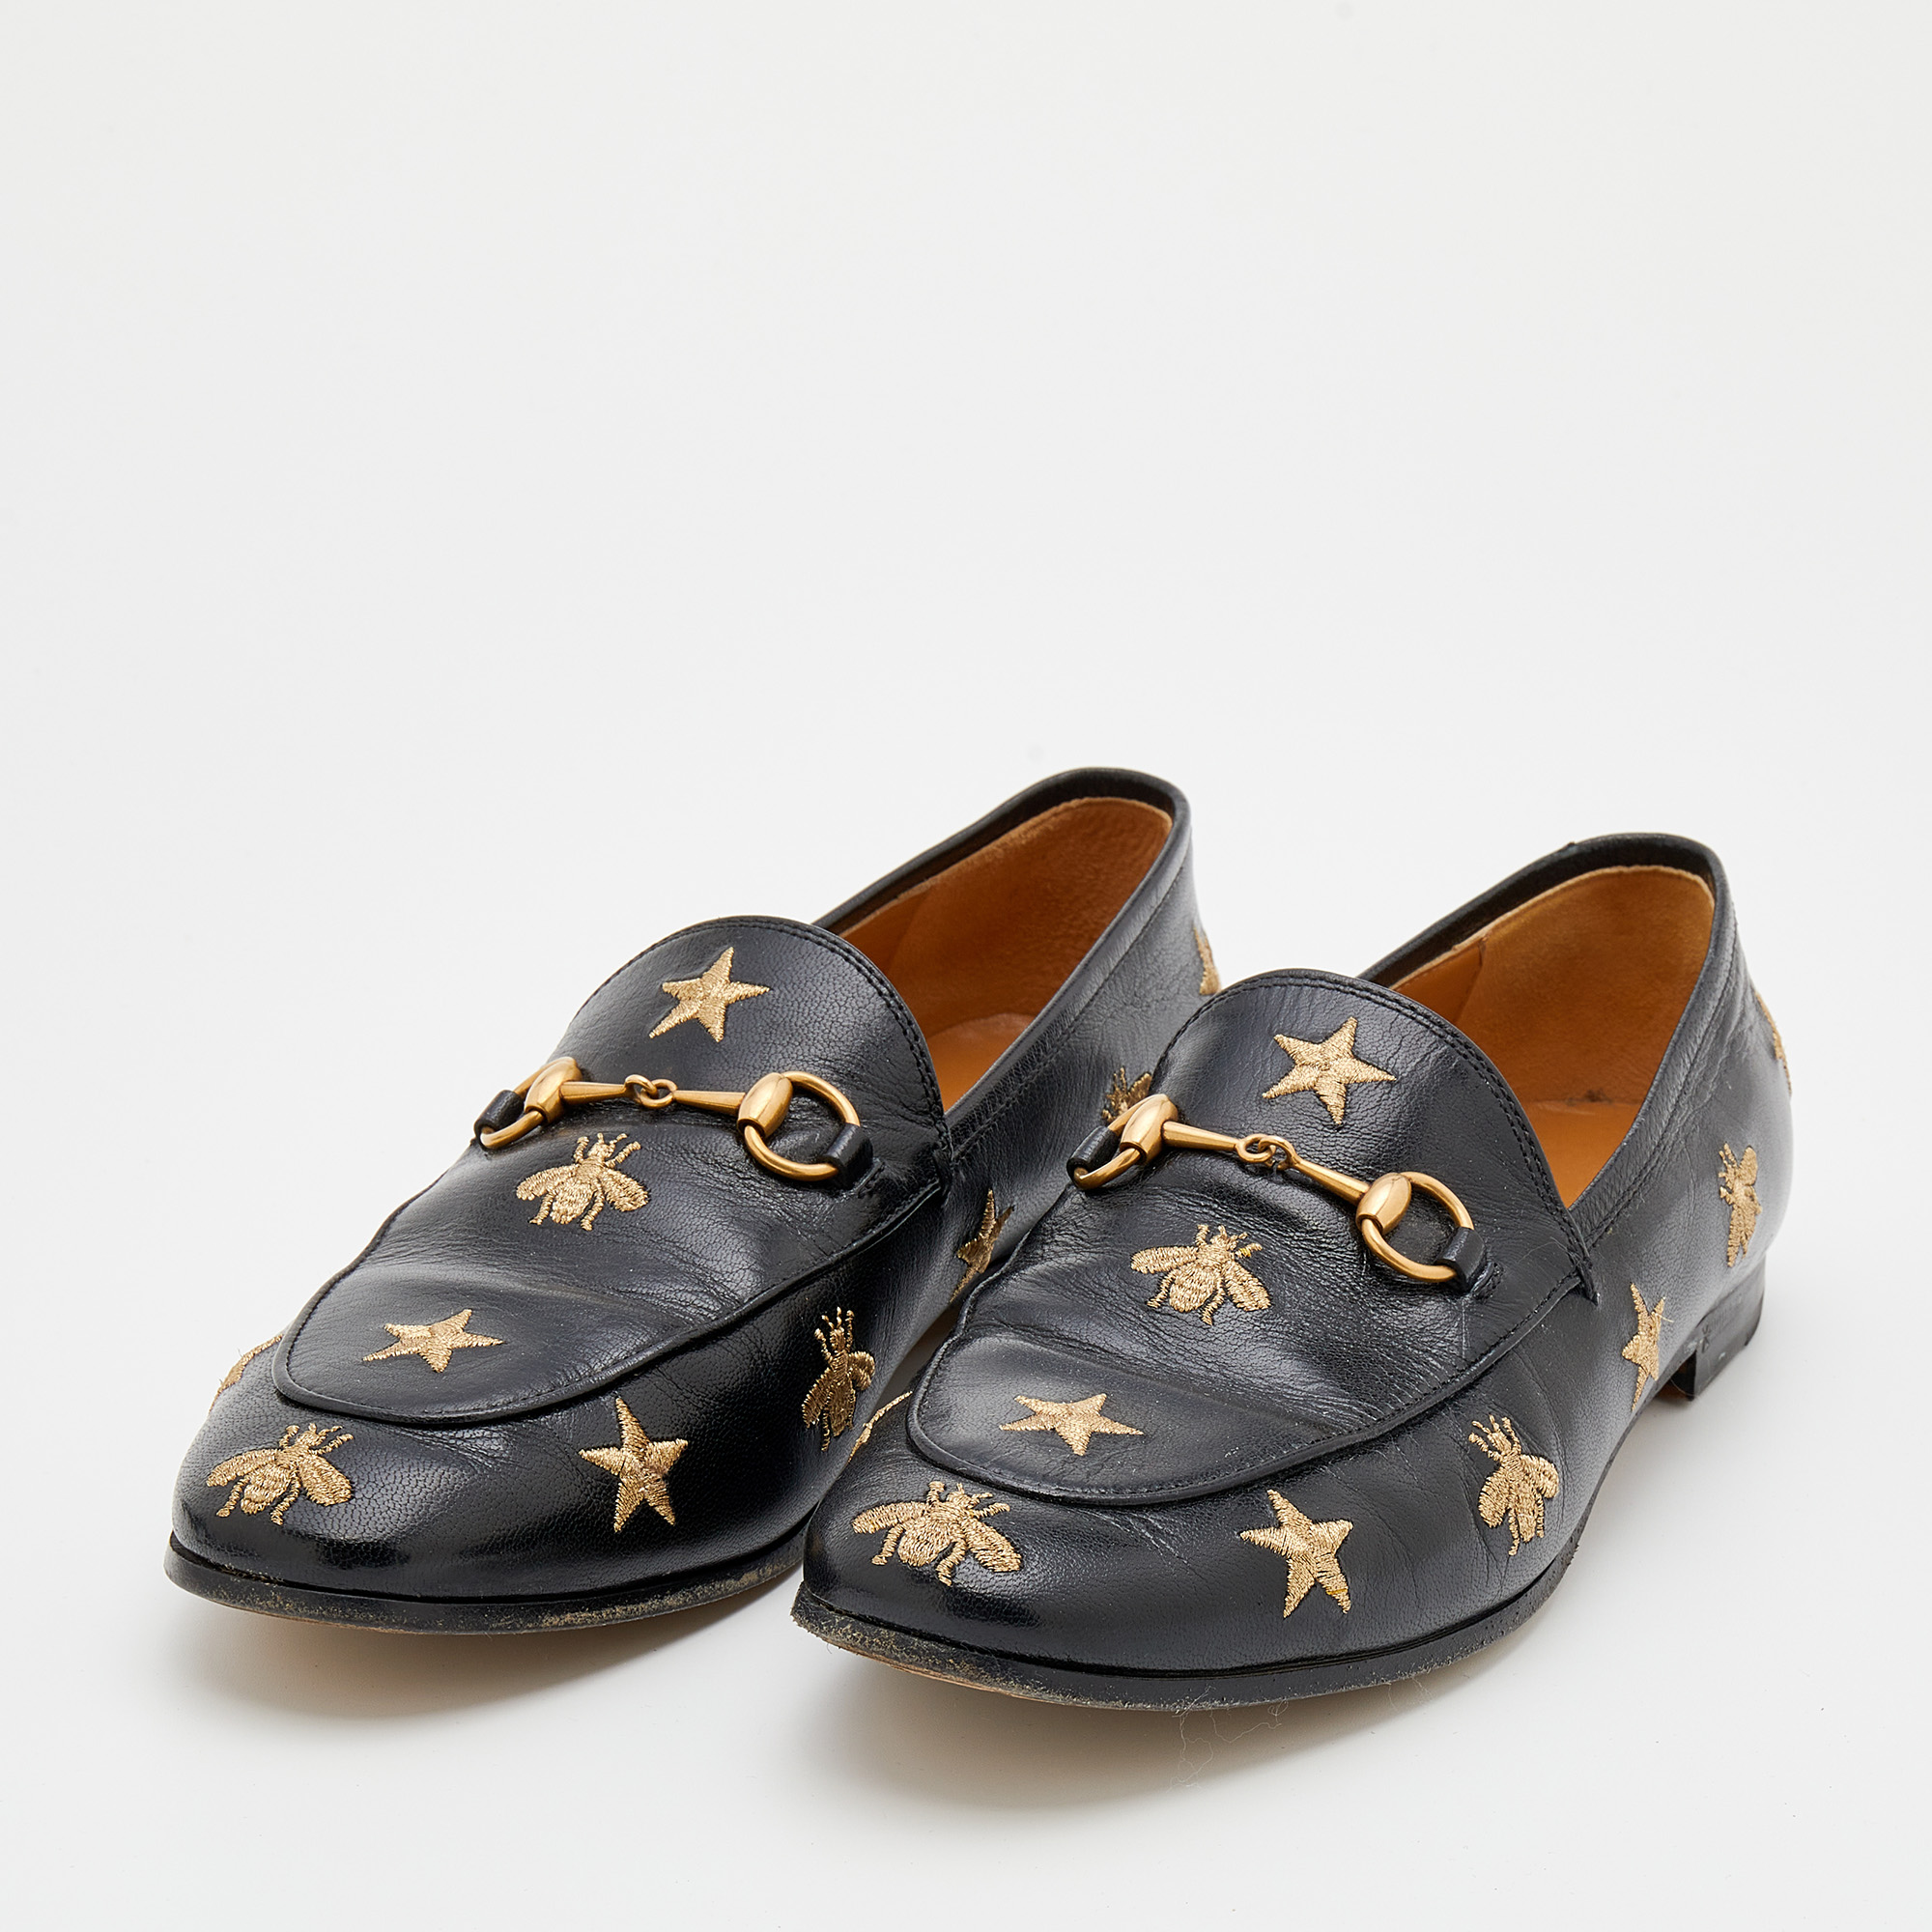 

Gucci Black Leather Embroidered Bee Star Horsebit Slip On Loafers Size